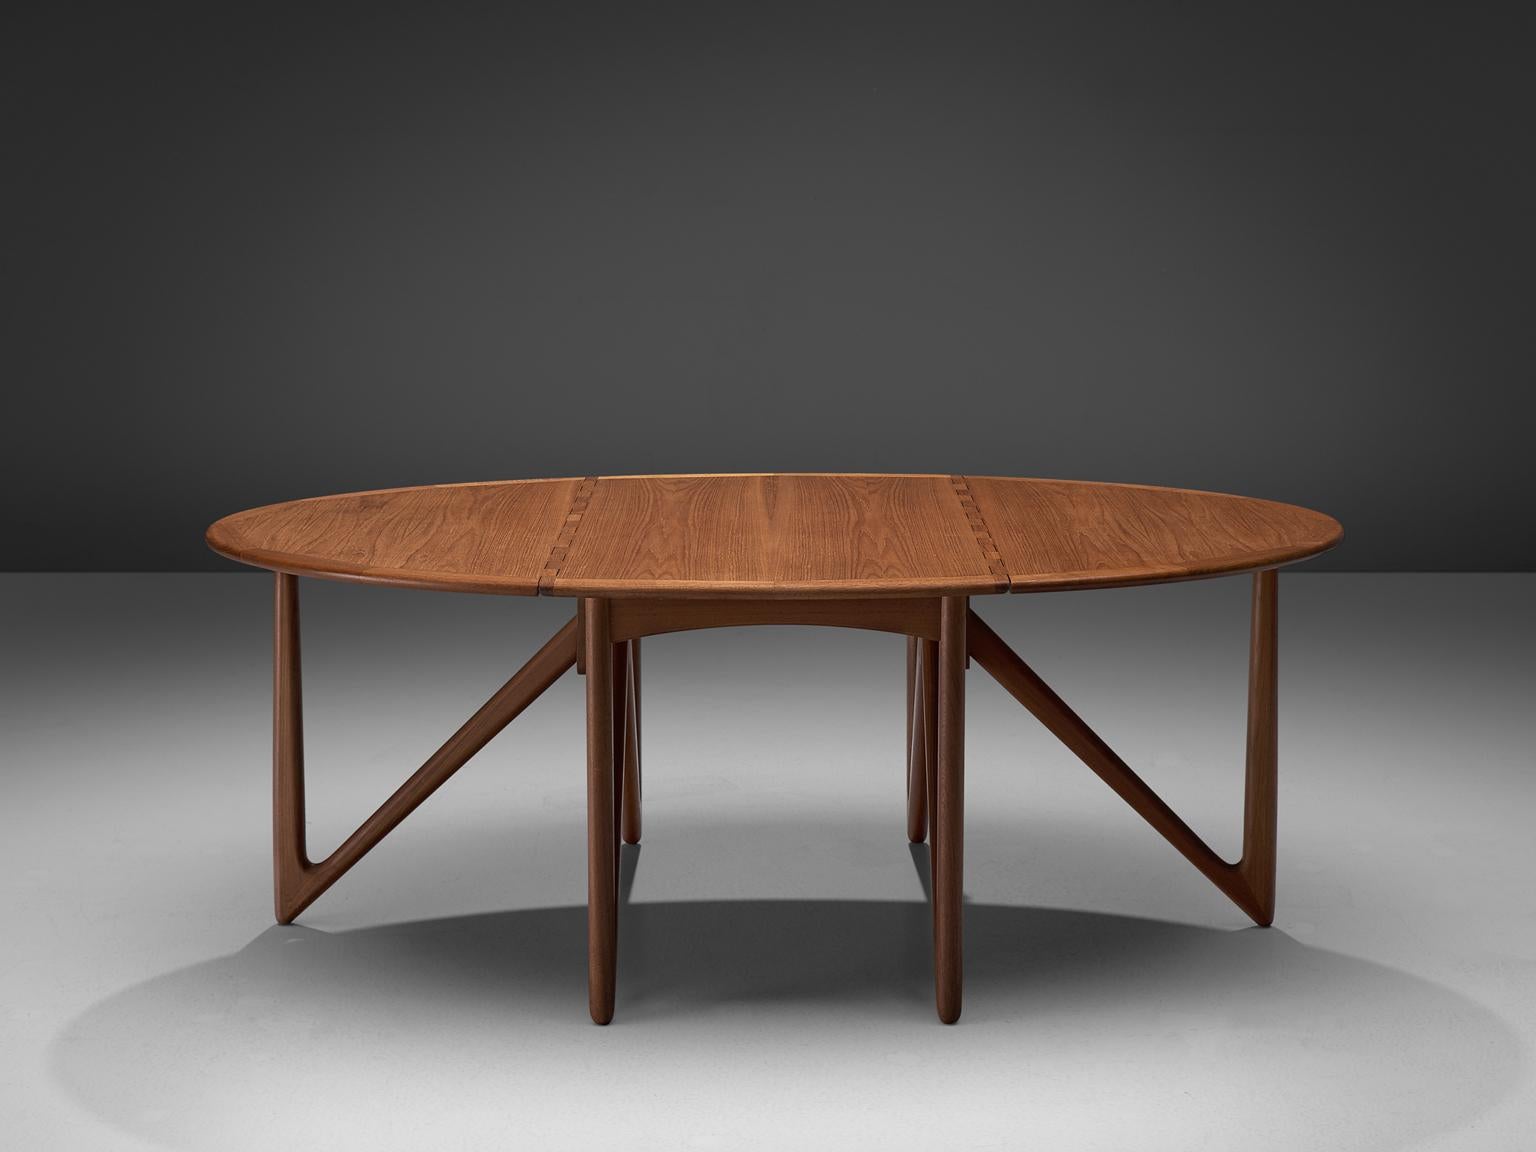 Kurt Ostervig for Jason Mobler modern, oval table in teak, Denmark 1960s.

This rare drop-leaf table shows an unusual, impressive base of six V-shaped legs, made with extraordinary craftsmanship. The clear shape of the oval top nicely contrasts to